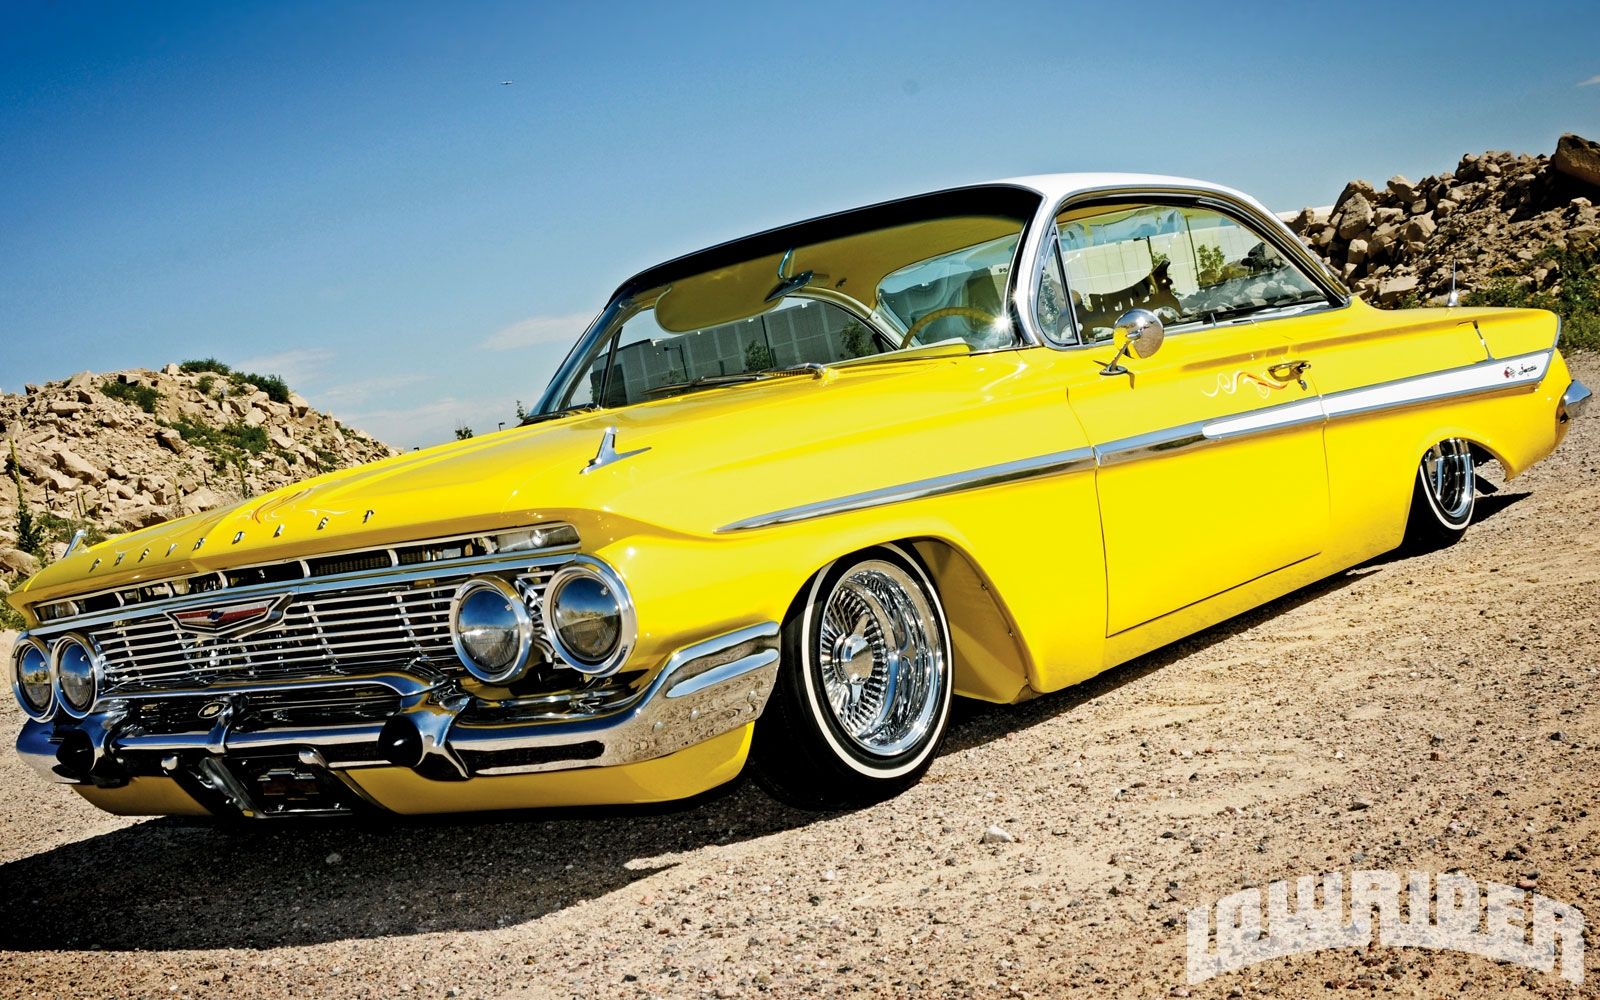 Lowrider Chevrolet Chevy Impala Hot Rod Muscle Car